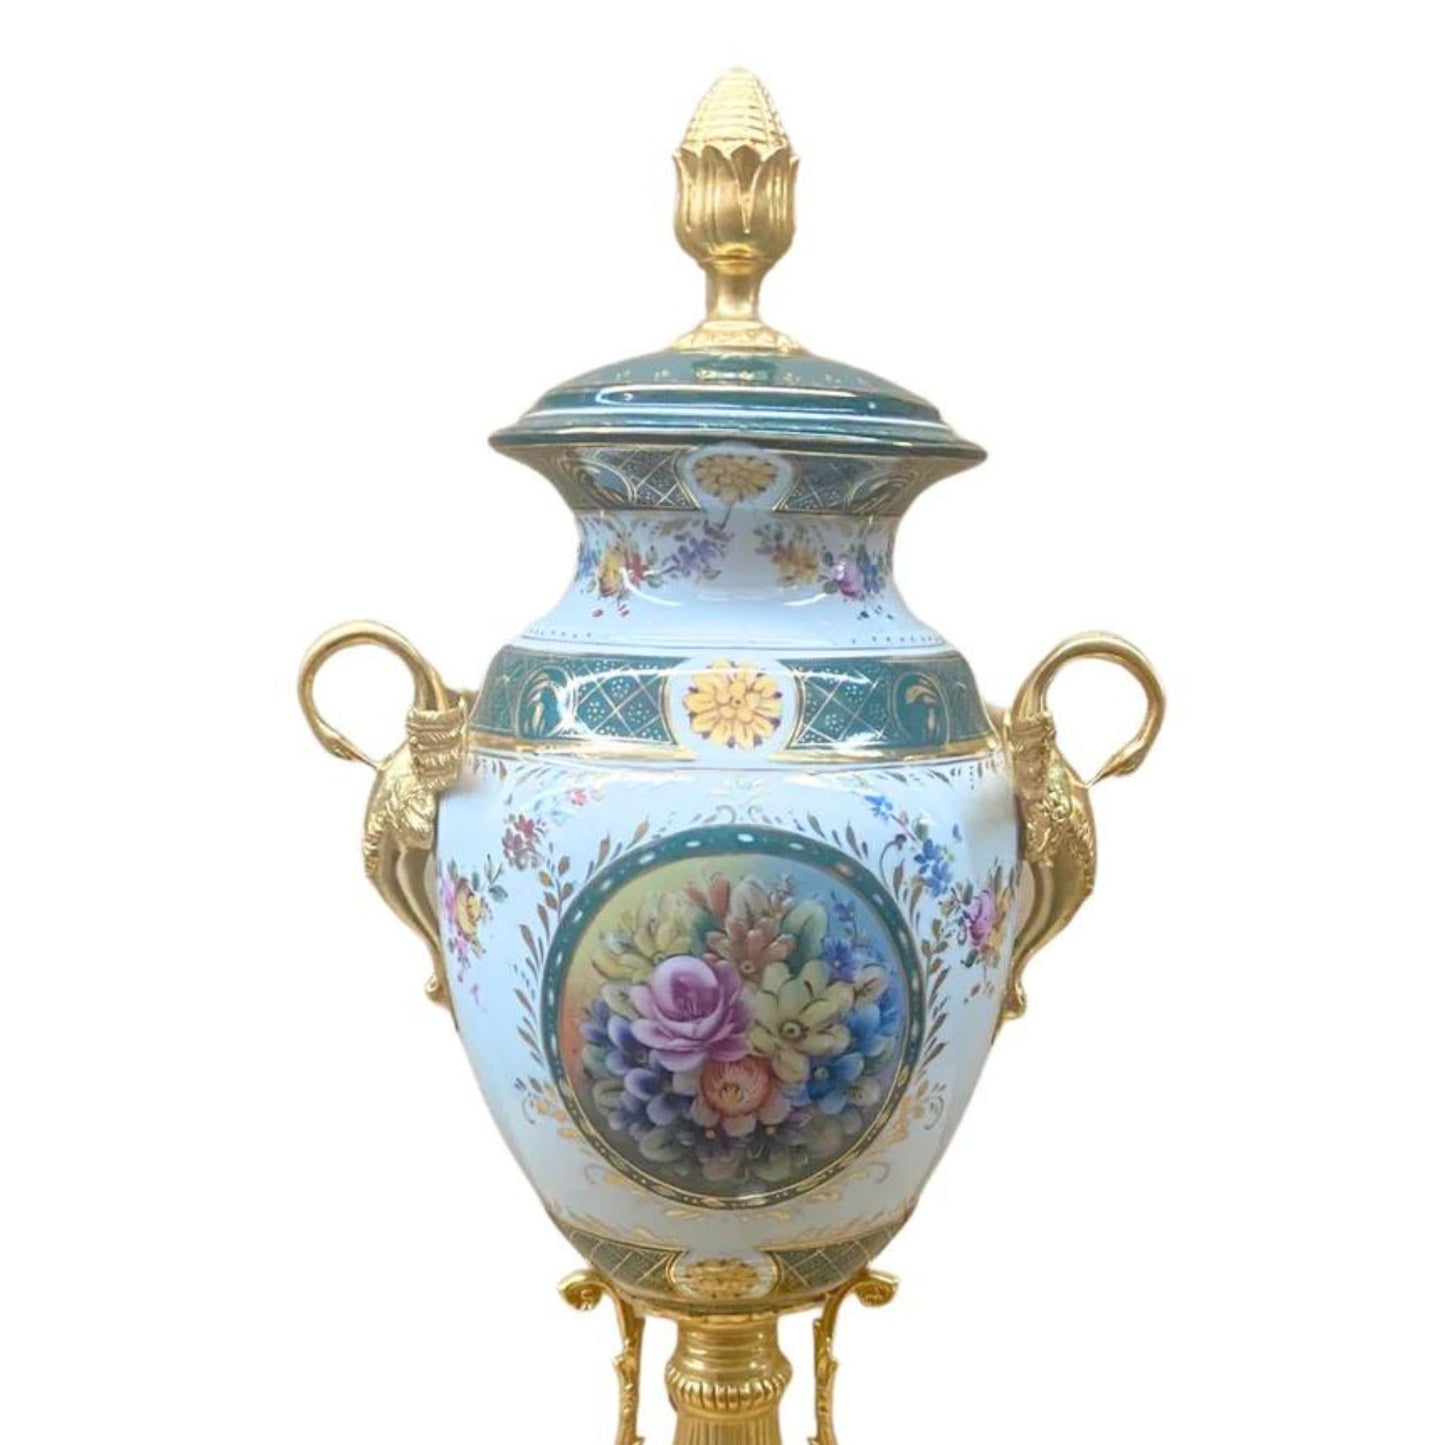 Hand-painted Green Baroque Motif Covered Jar